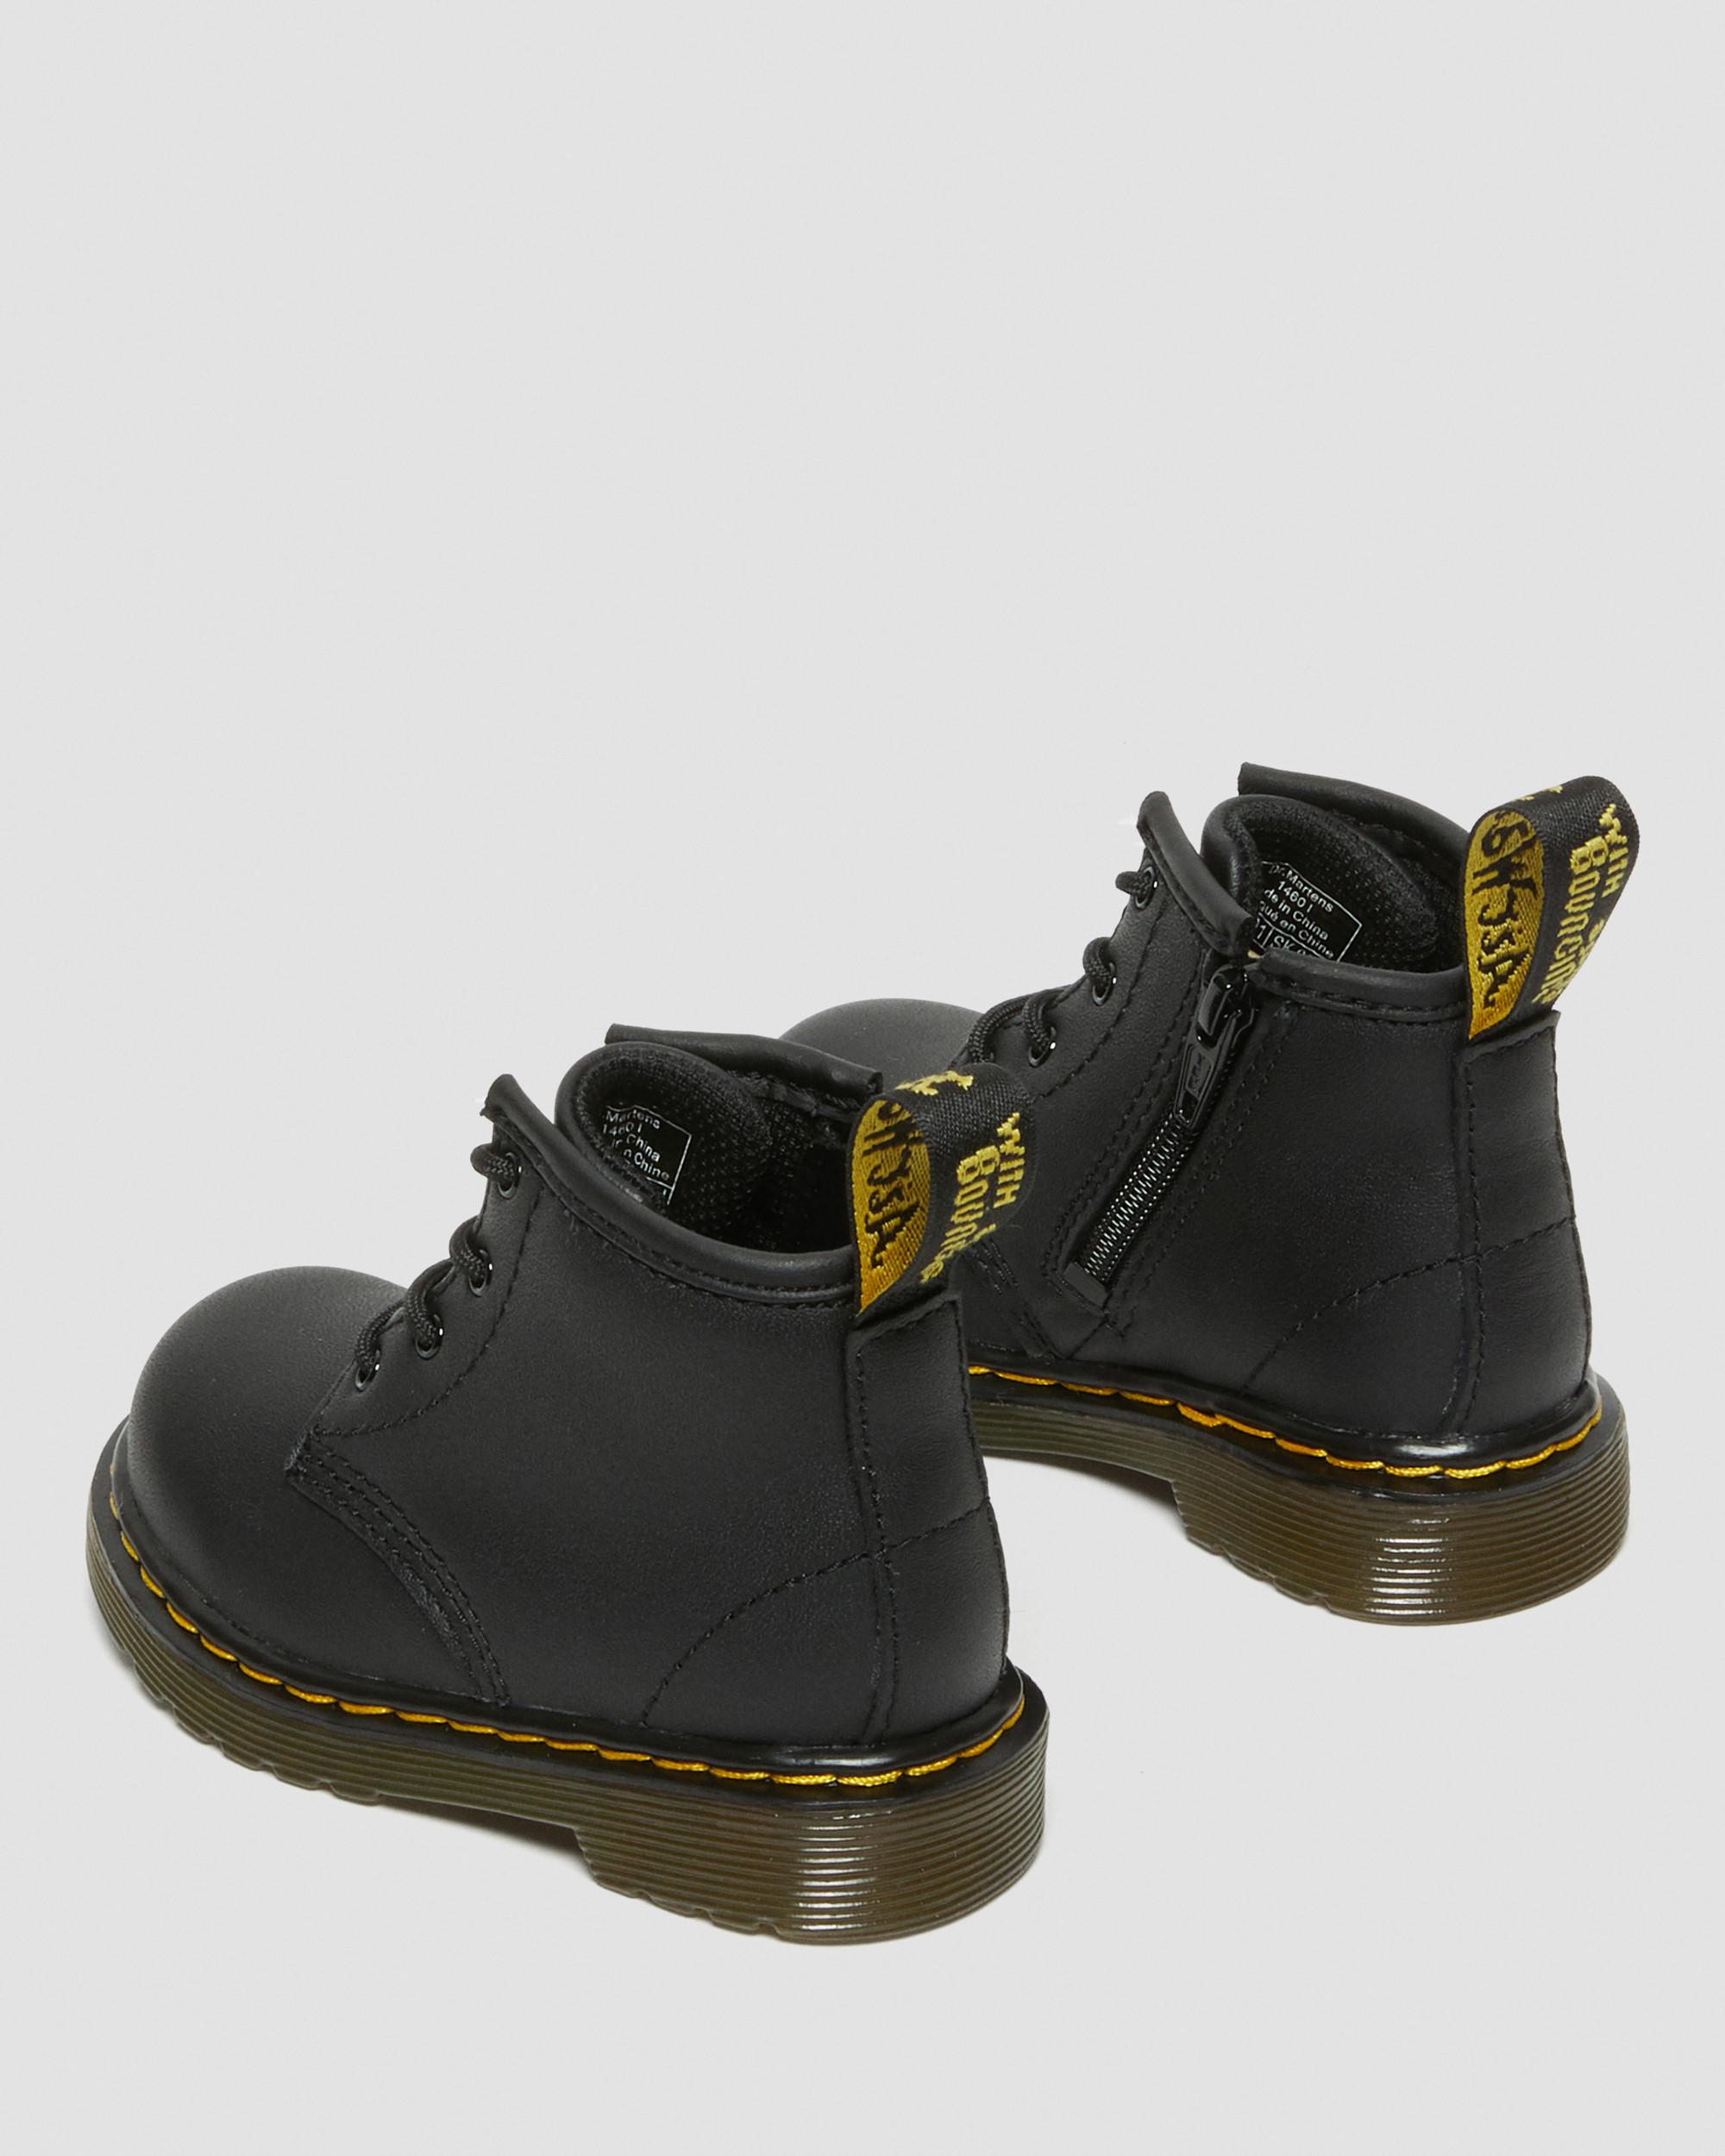 Infant 1460 Softy T Leather Ankle Boots in Black